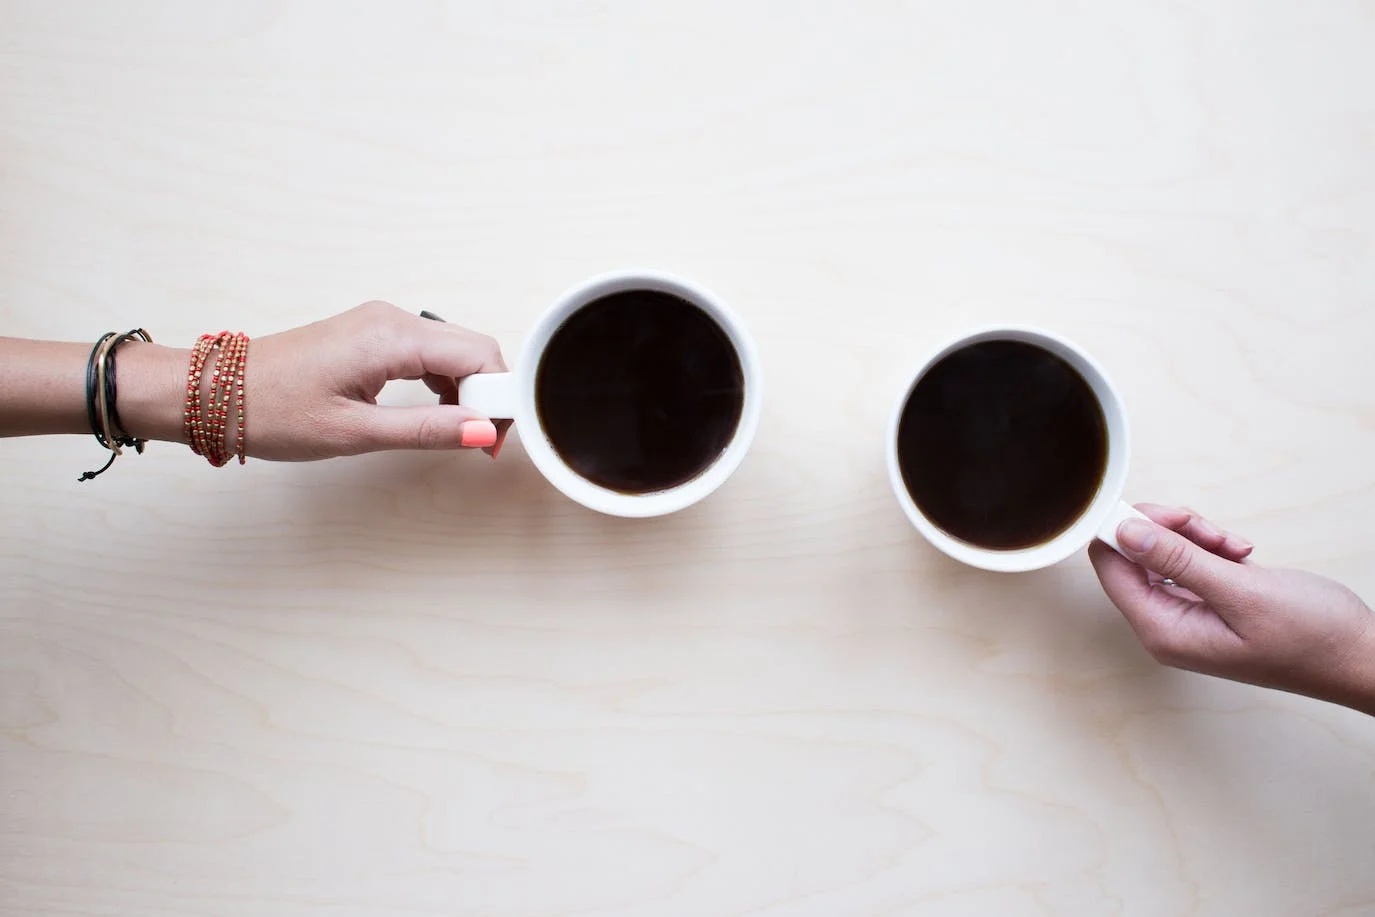 Coffee photo : top view photo of two steaming cups of coffee, each held by a hand. The one on the left is held by the hand of a white woman, of whom we can only see her hand and a part of her arm on which she wears bracelets. The one on the right is held by a white man whose hand is visible only.